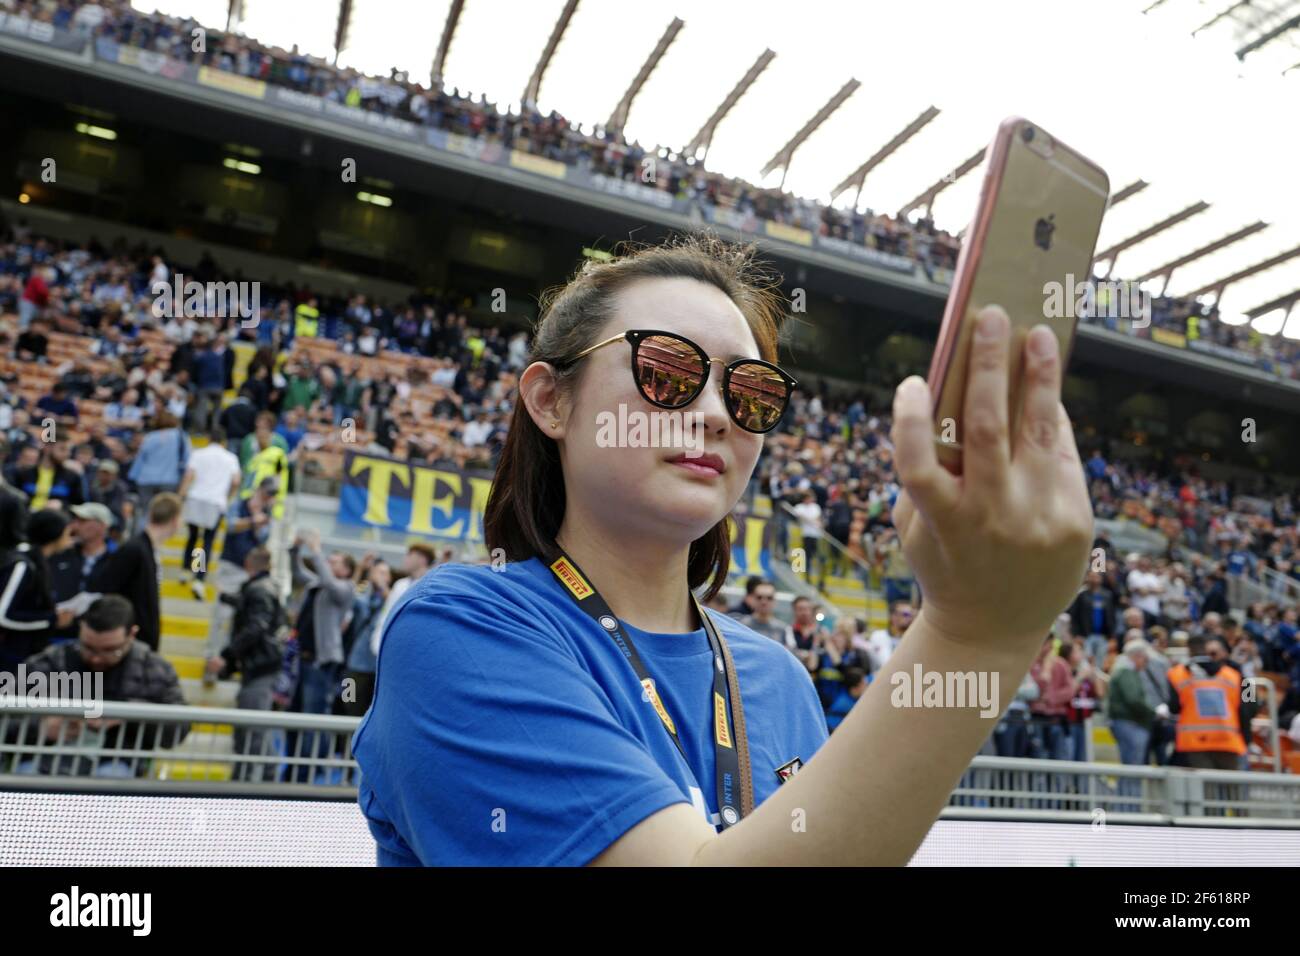 Chinese girl Inter Milan's football fan taking a selfie portrait with an iPhone  at the san siro football stadium, in Milan. Italy. Stock Photo